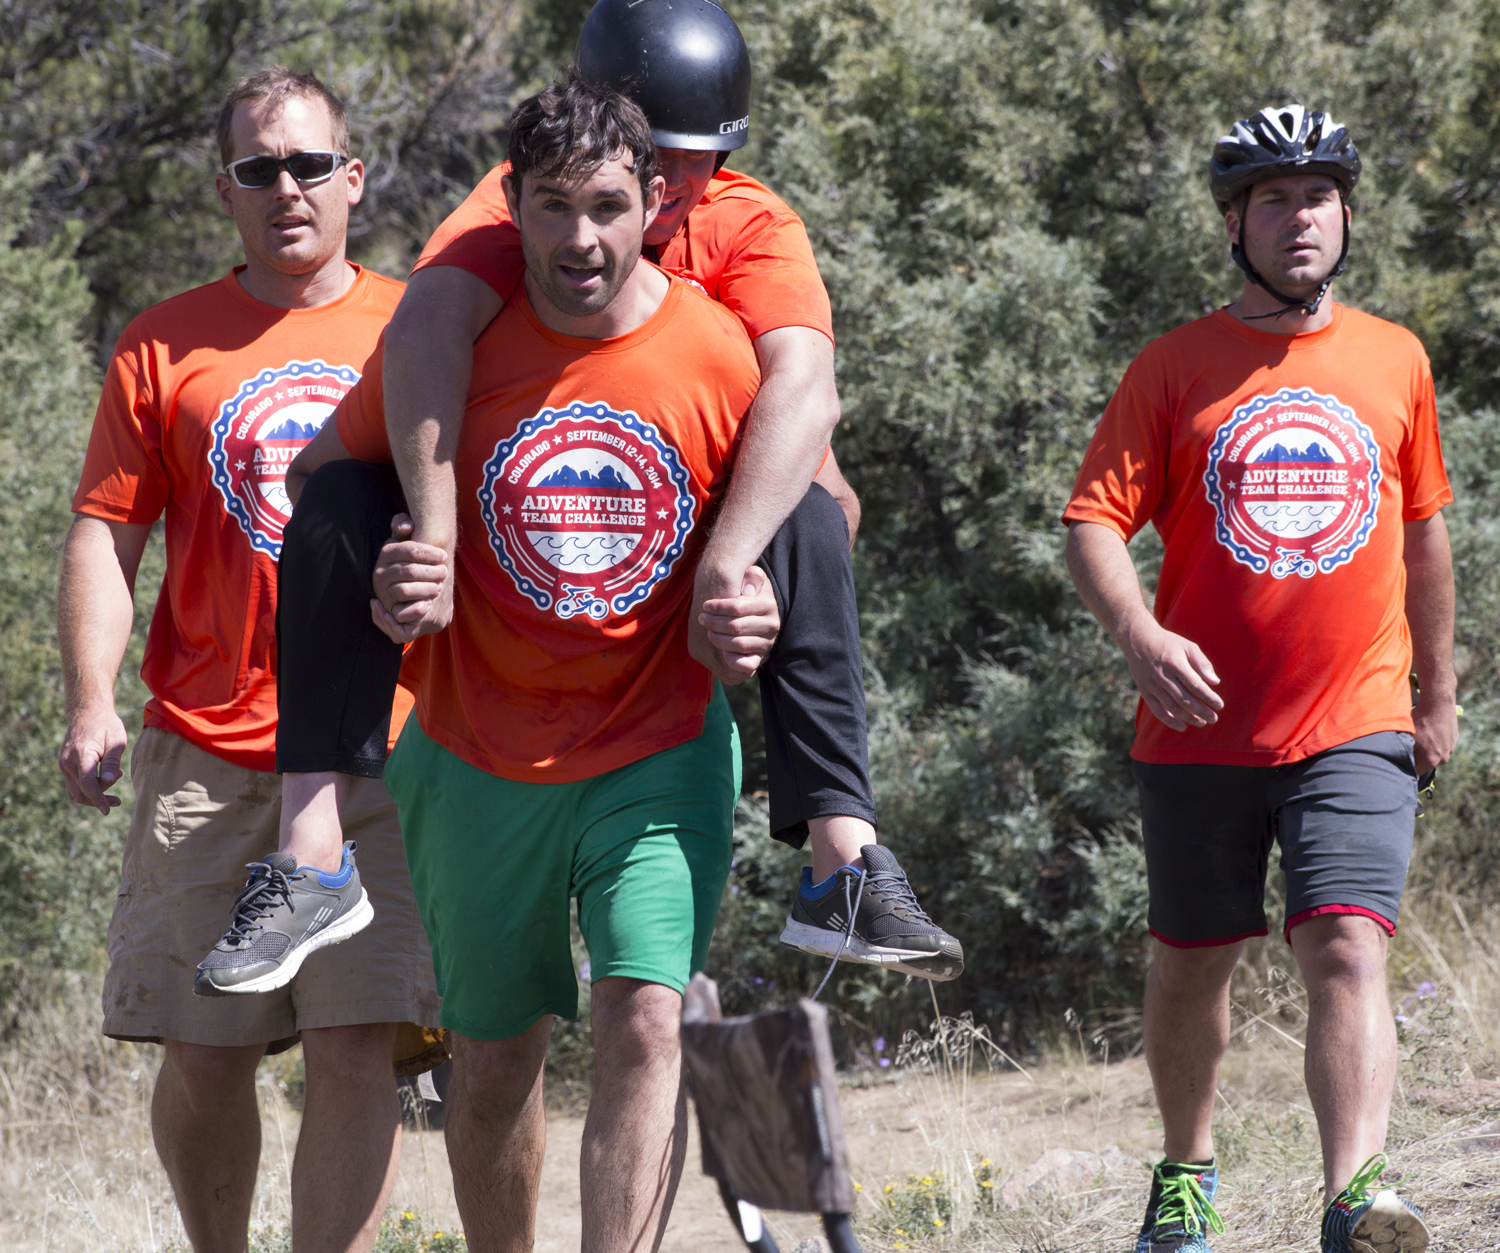 Team members work together during the 2014 Adventure Team Challenge Colorado. Photograph by Chelsea Roberson.